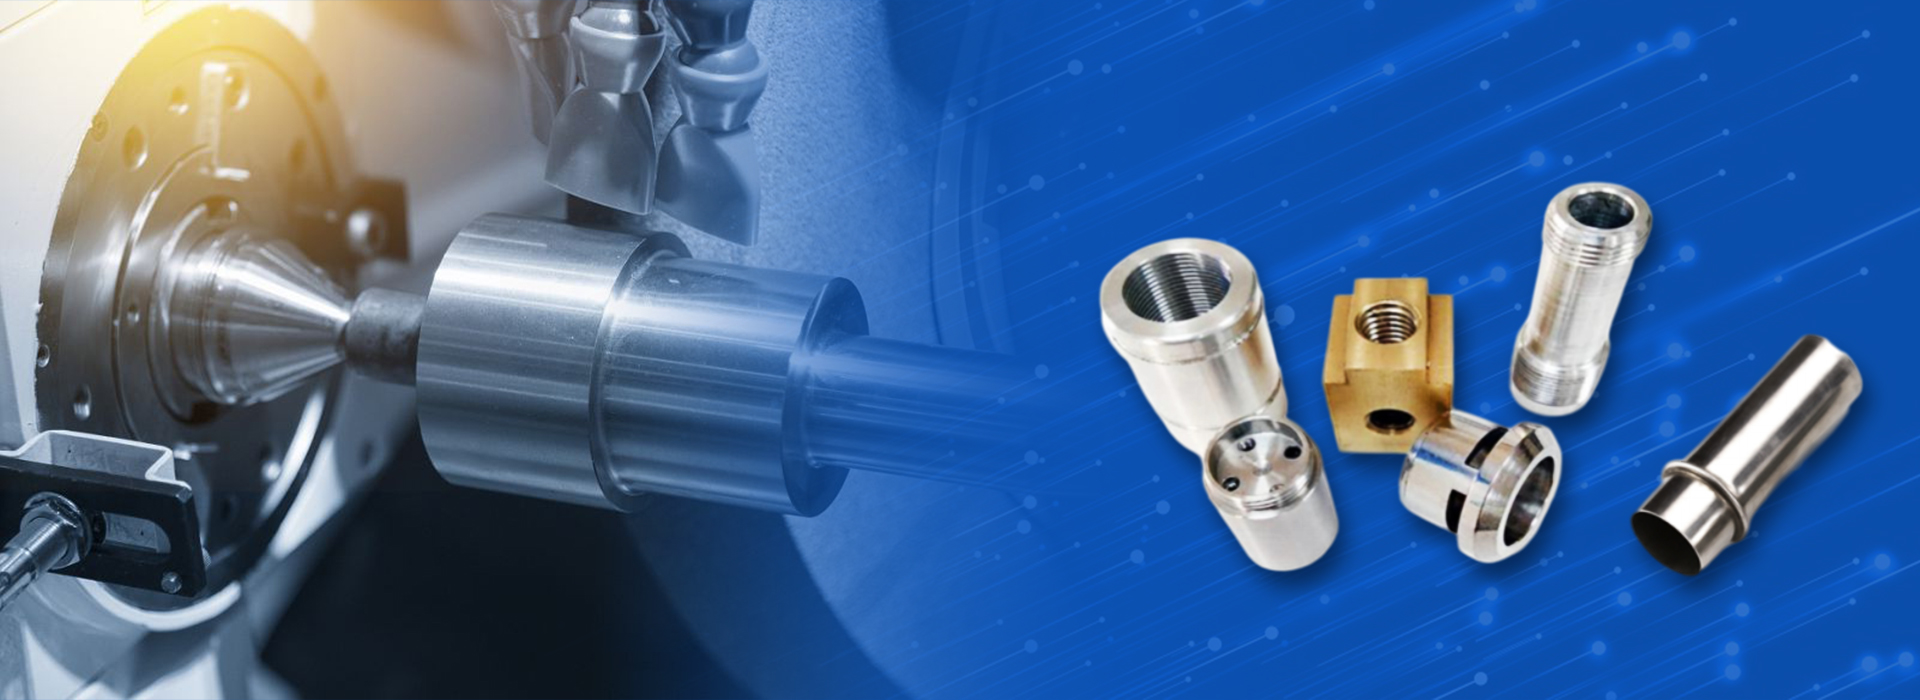 PRECISION PARTS BY HIGH-PRECISION MACHINING CENTER